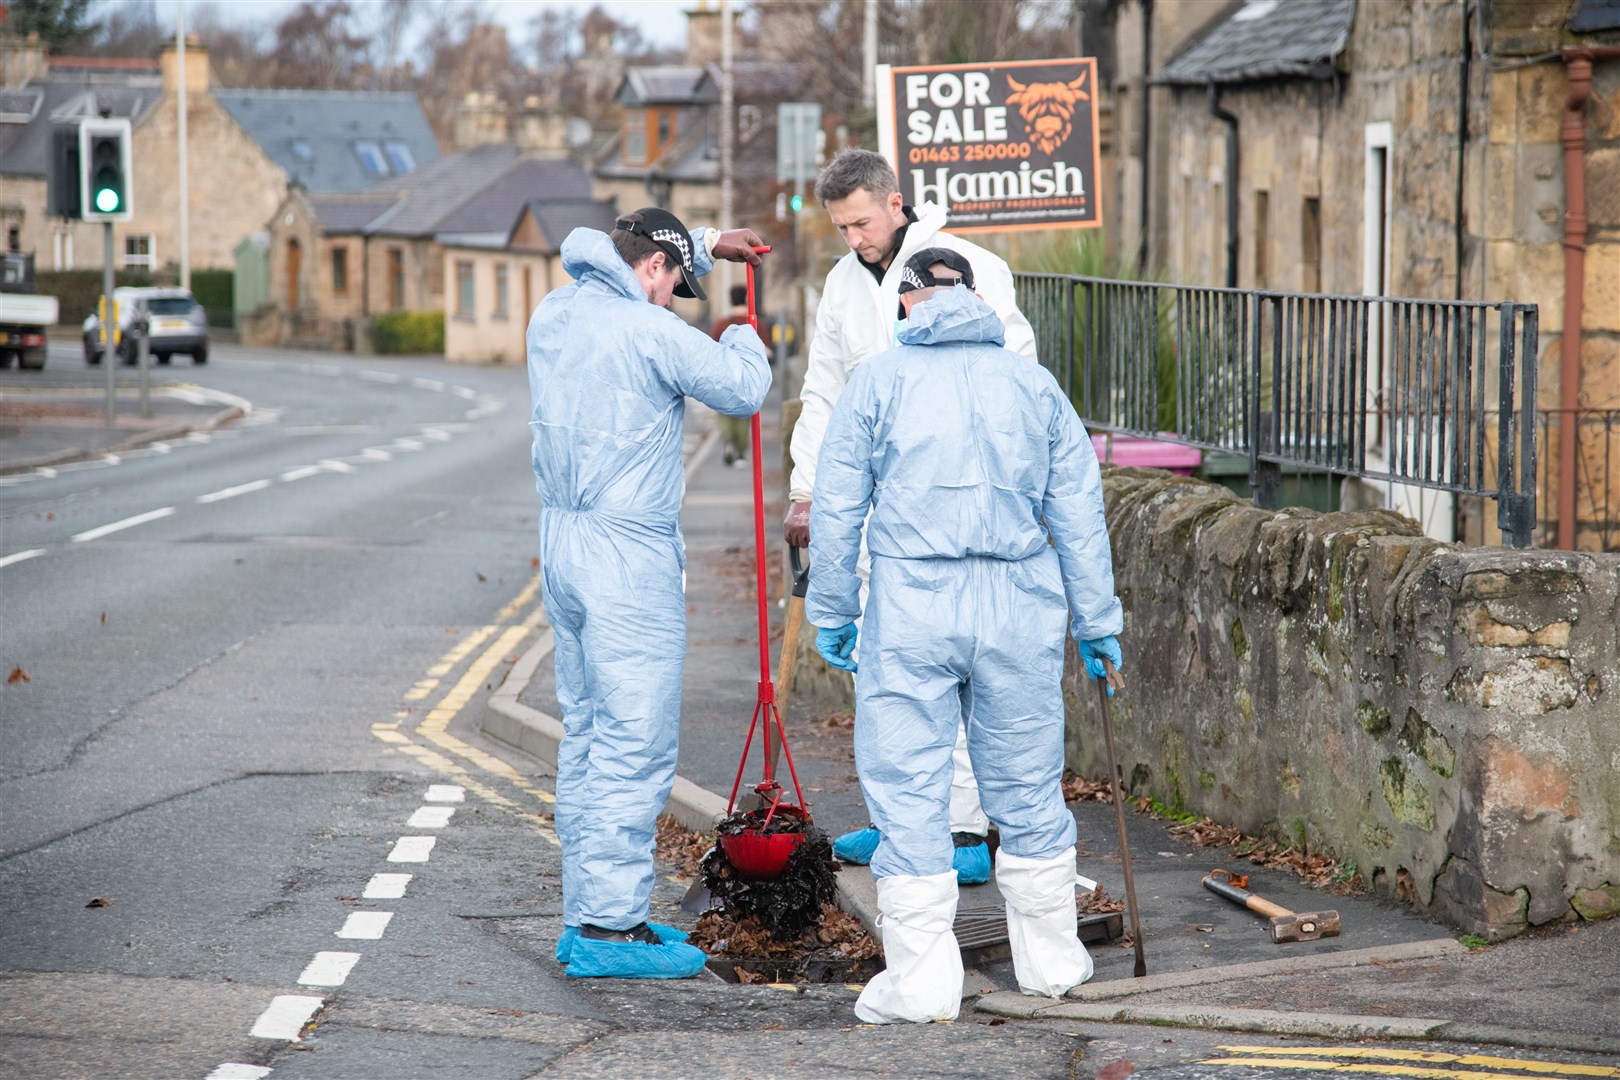 Officers checking drains for evidence last week. Picture: HNMedia